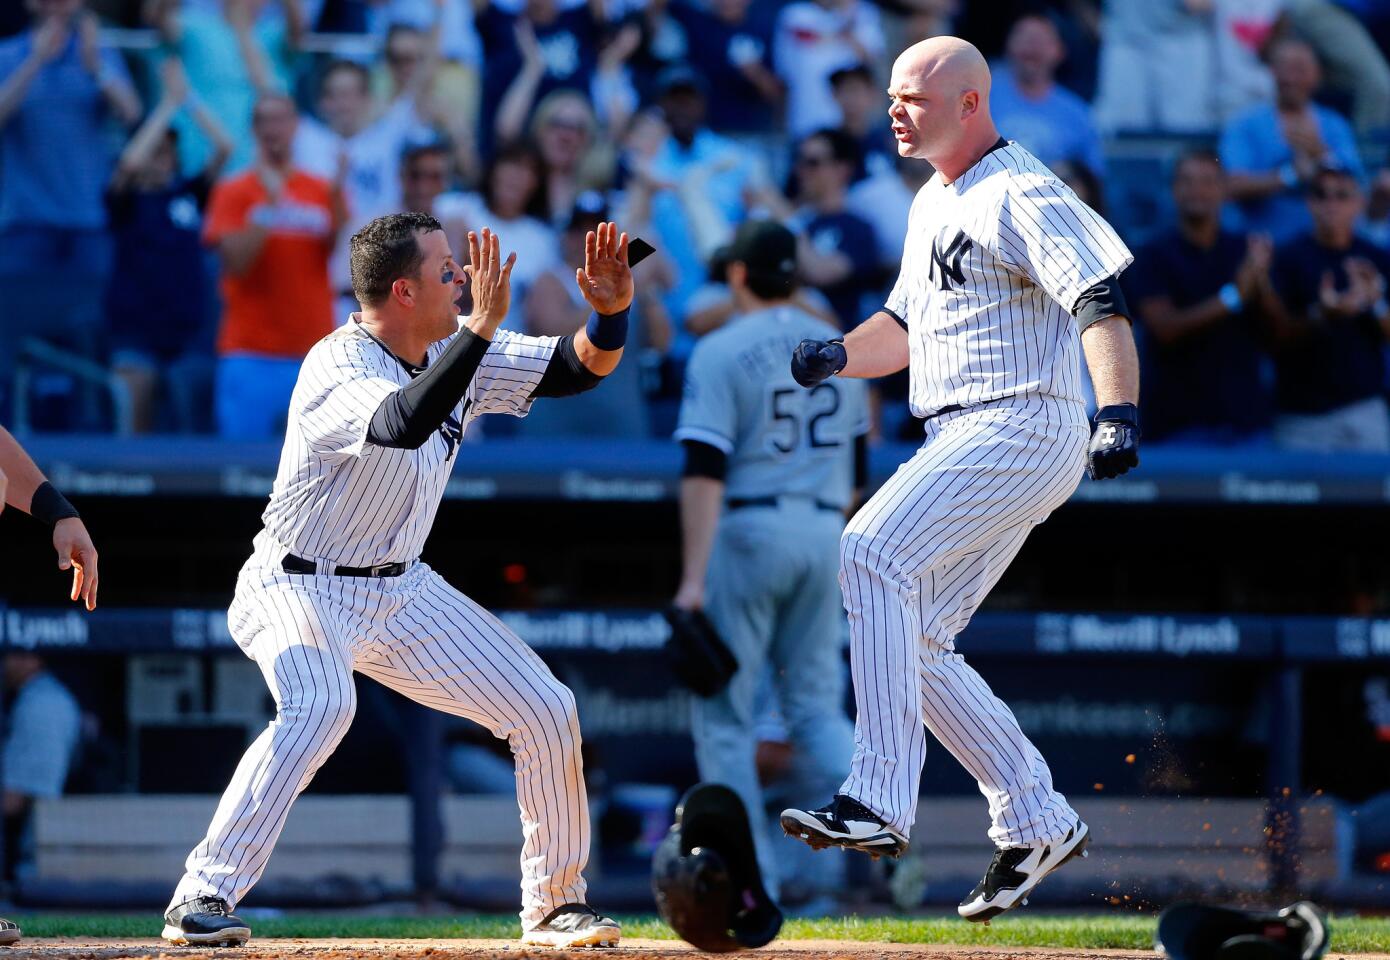 The Yankees' Brian McCann celebrates his game-winning home run in 10th inning off the White Sox's Jake Petricka.